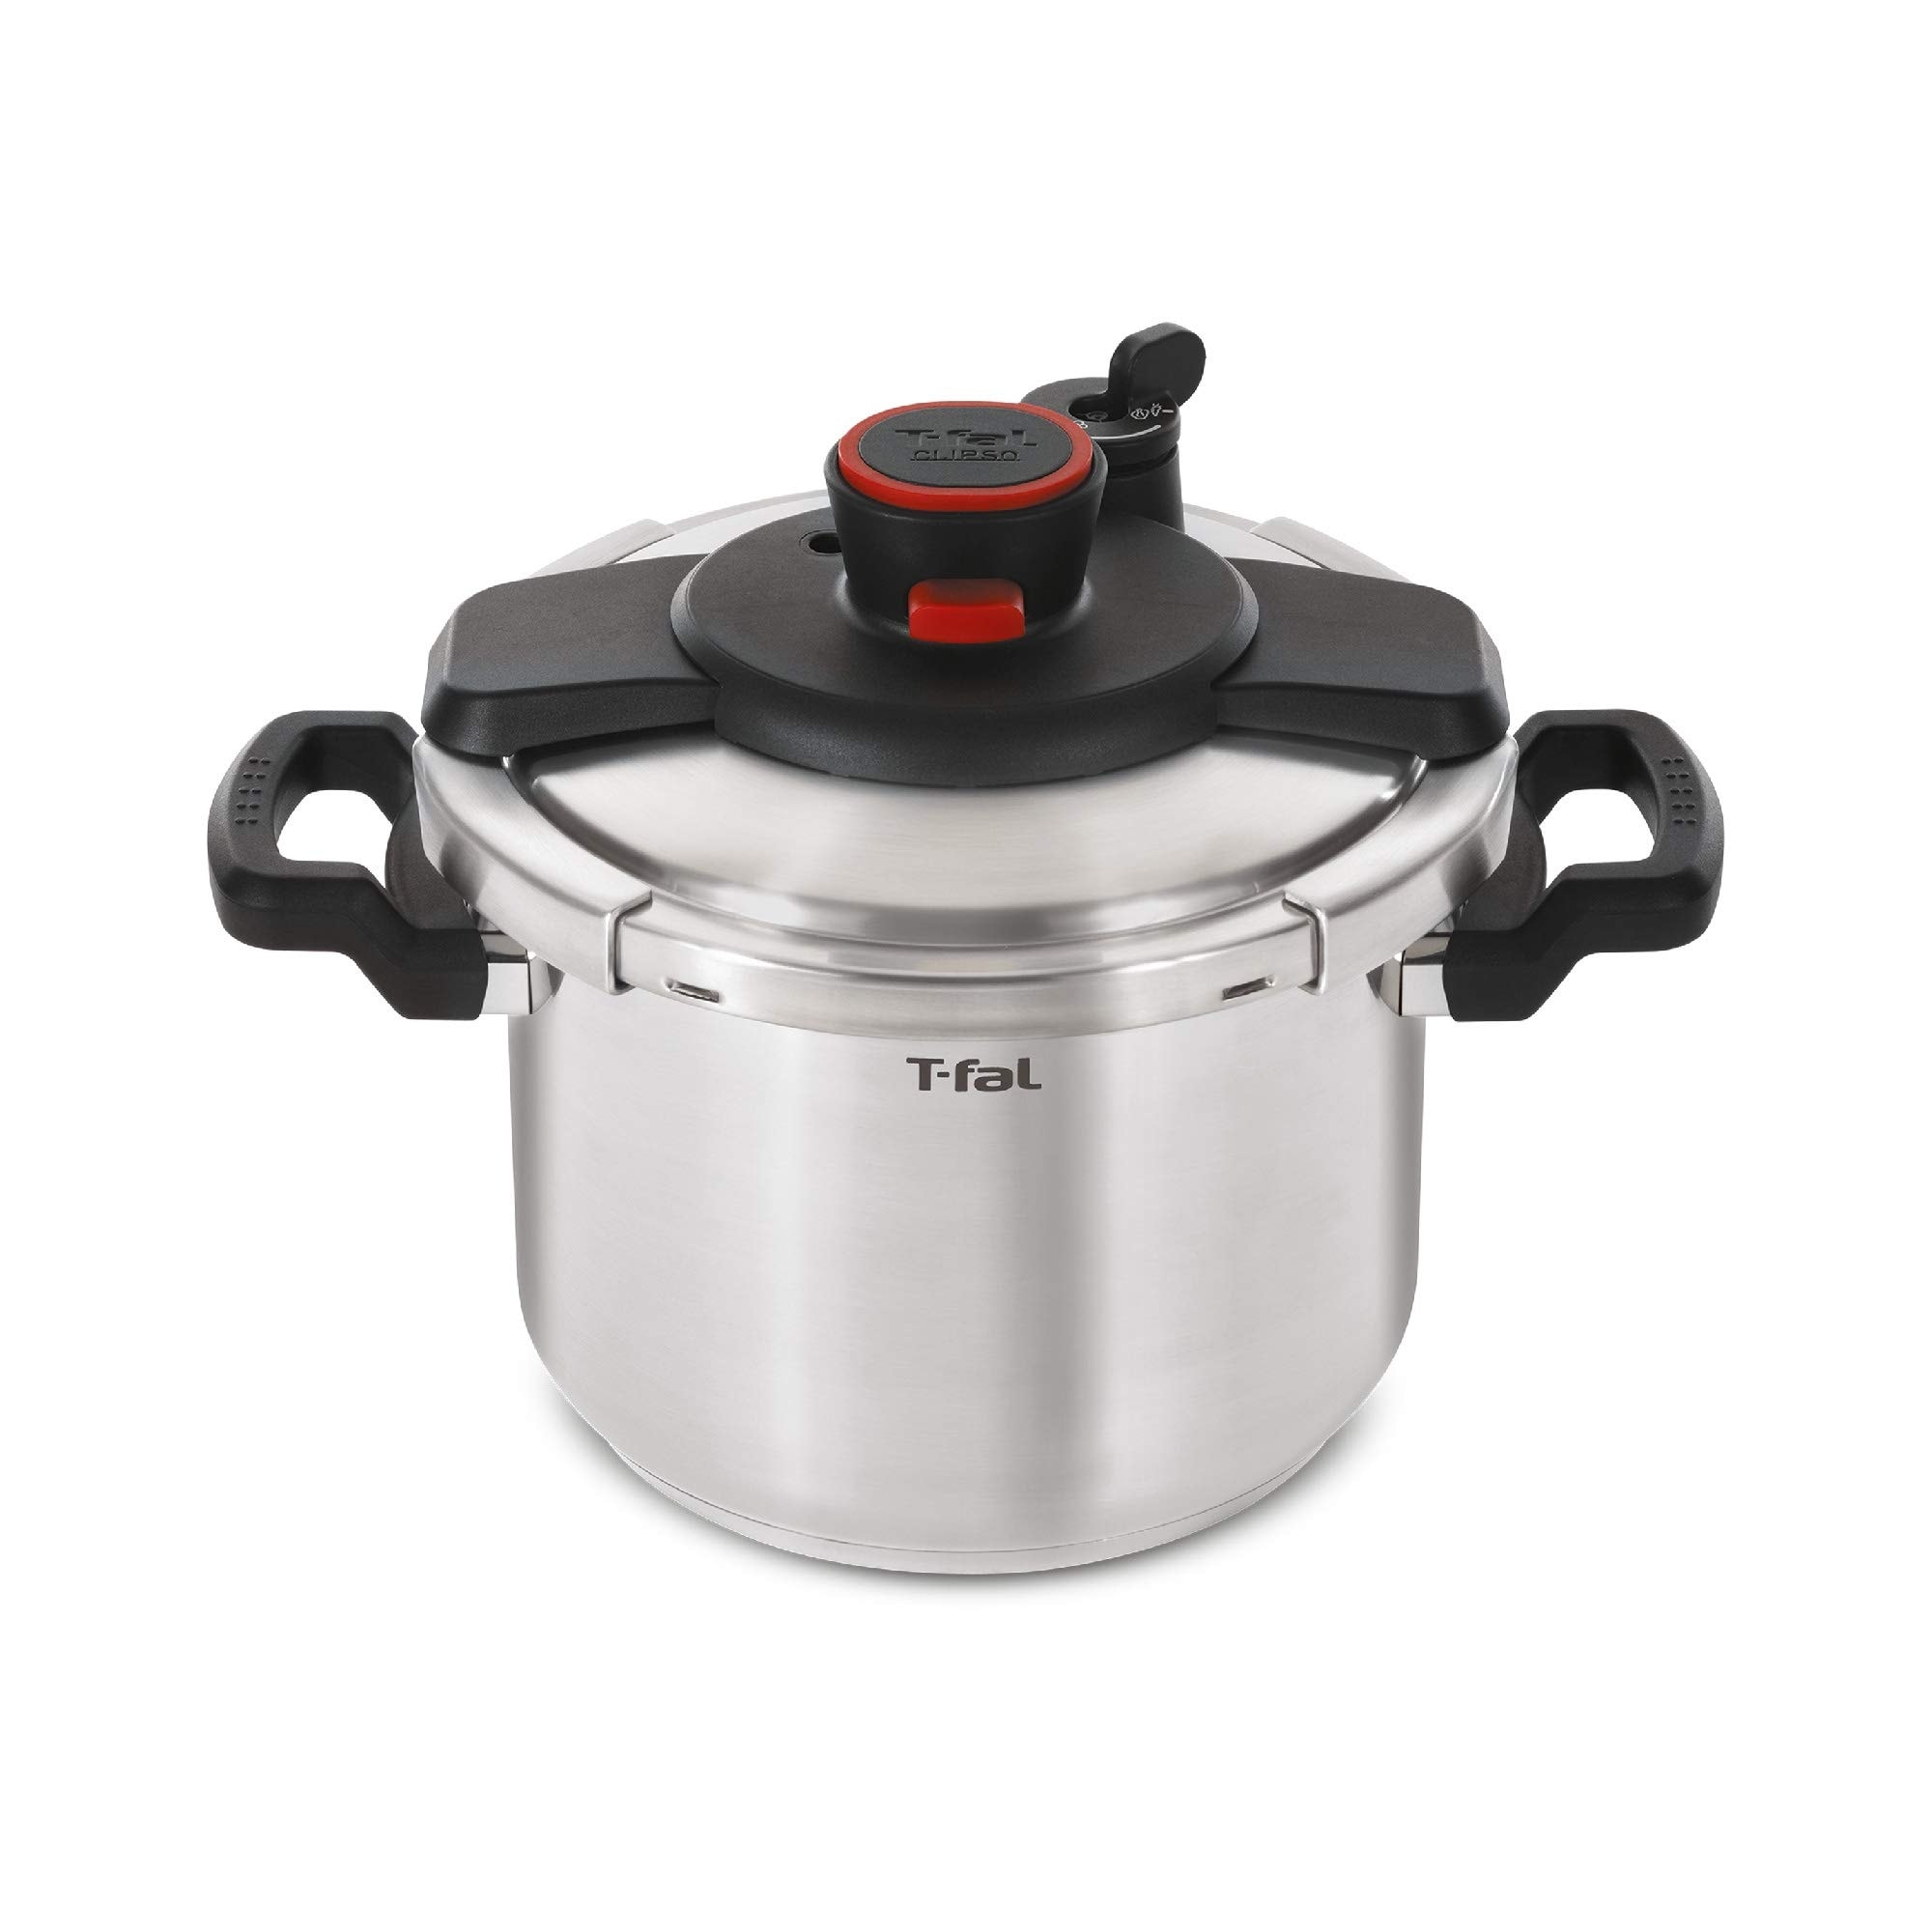 https://ak1.ostkcdn.com/images/products/is/images/direct/65c7e77d9795c8993939eec55e3452c3e7bdc686/Stainless-Steel-Pressure-Cooker-8-Quart-Induction-Cookware%2C-Pots-and-Pans%2C-Dishwasher-Safe.jpg